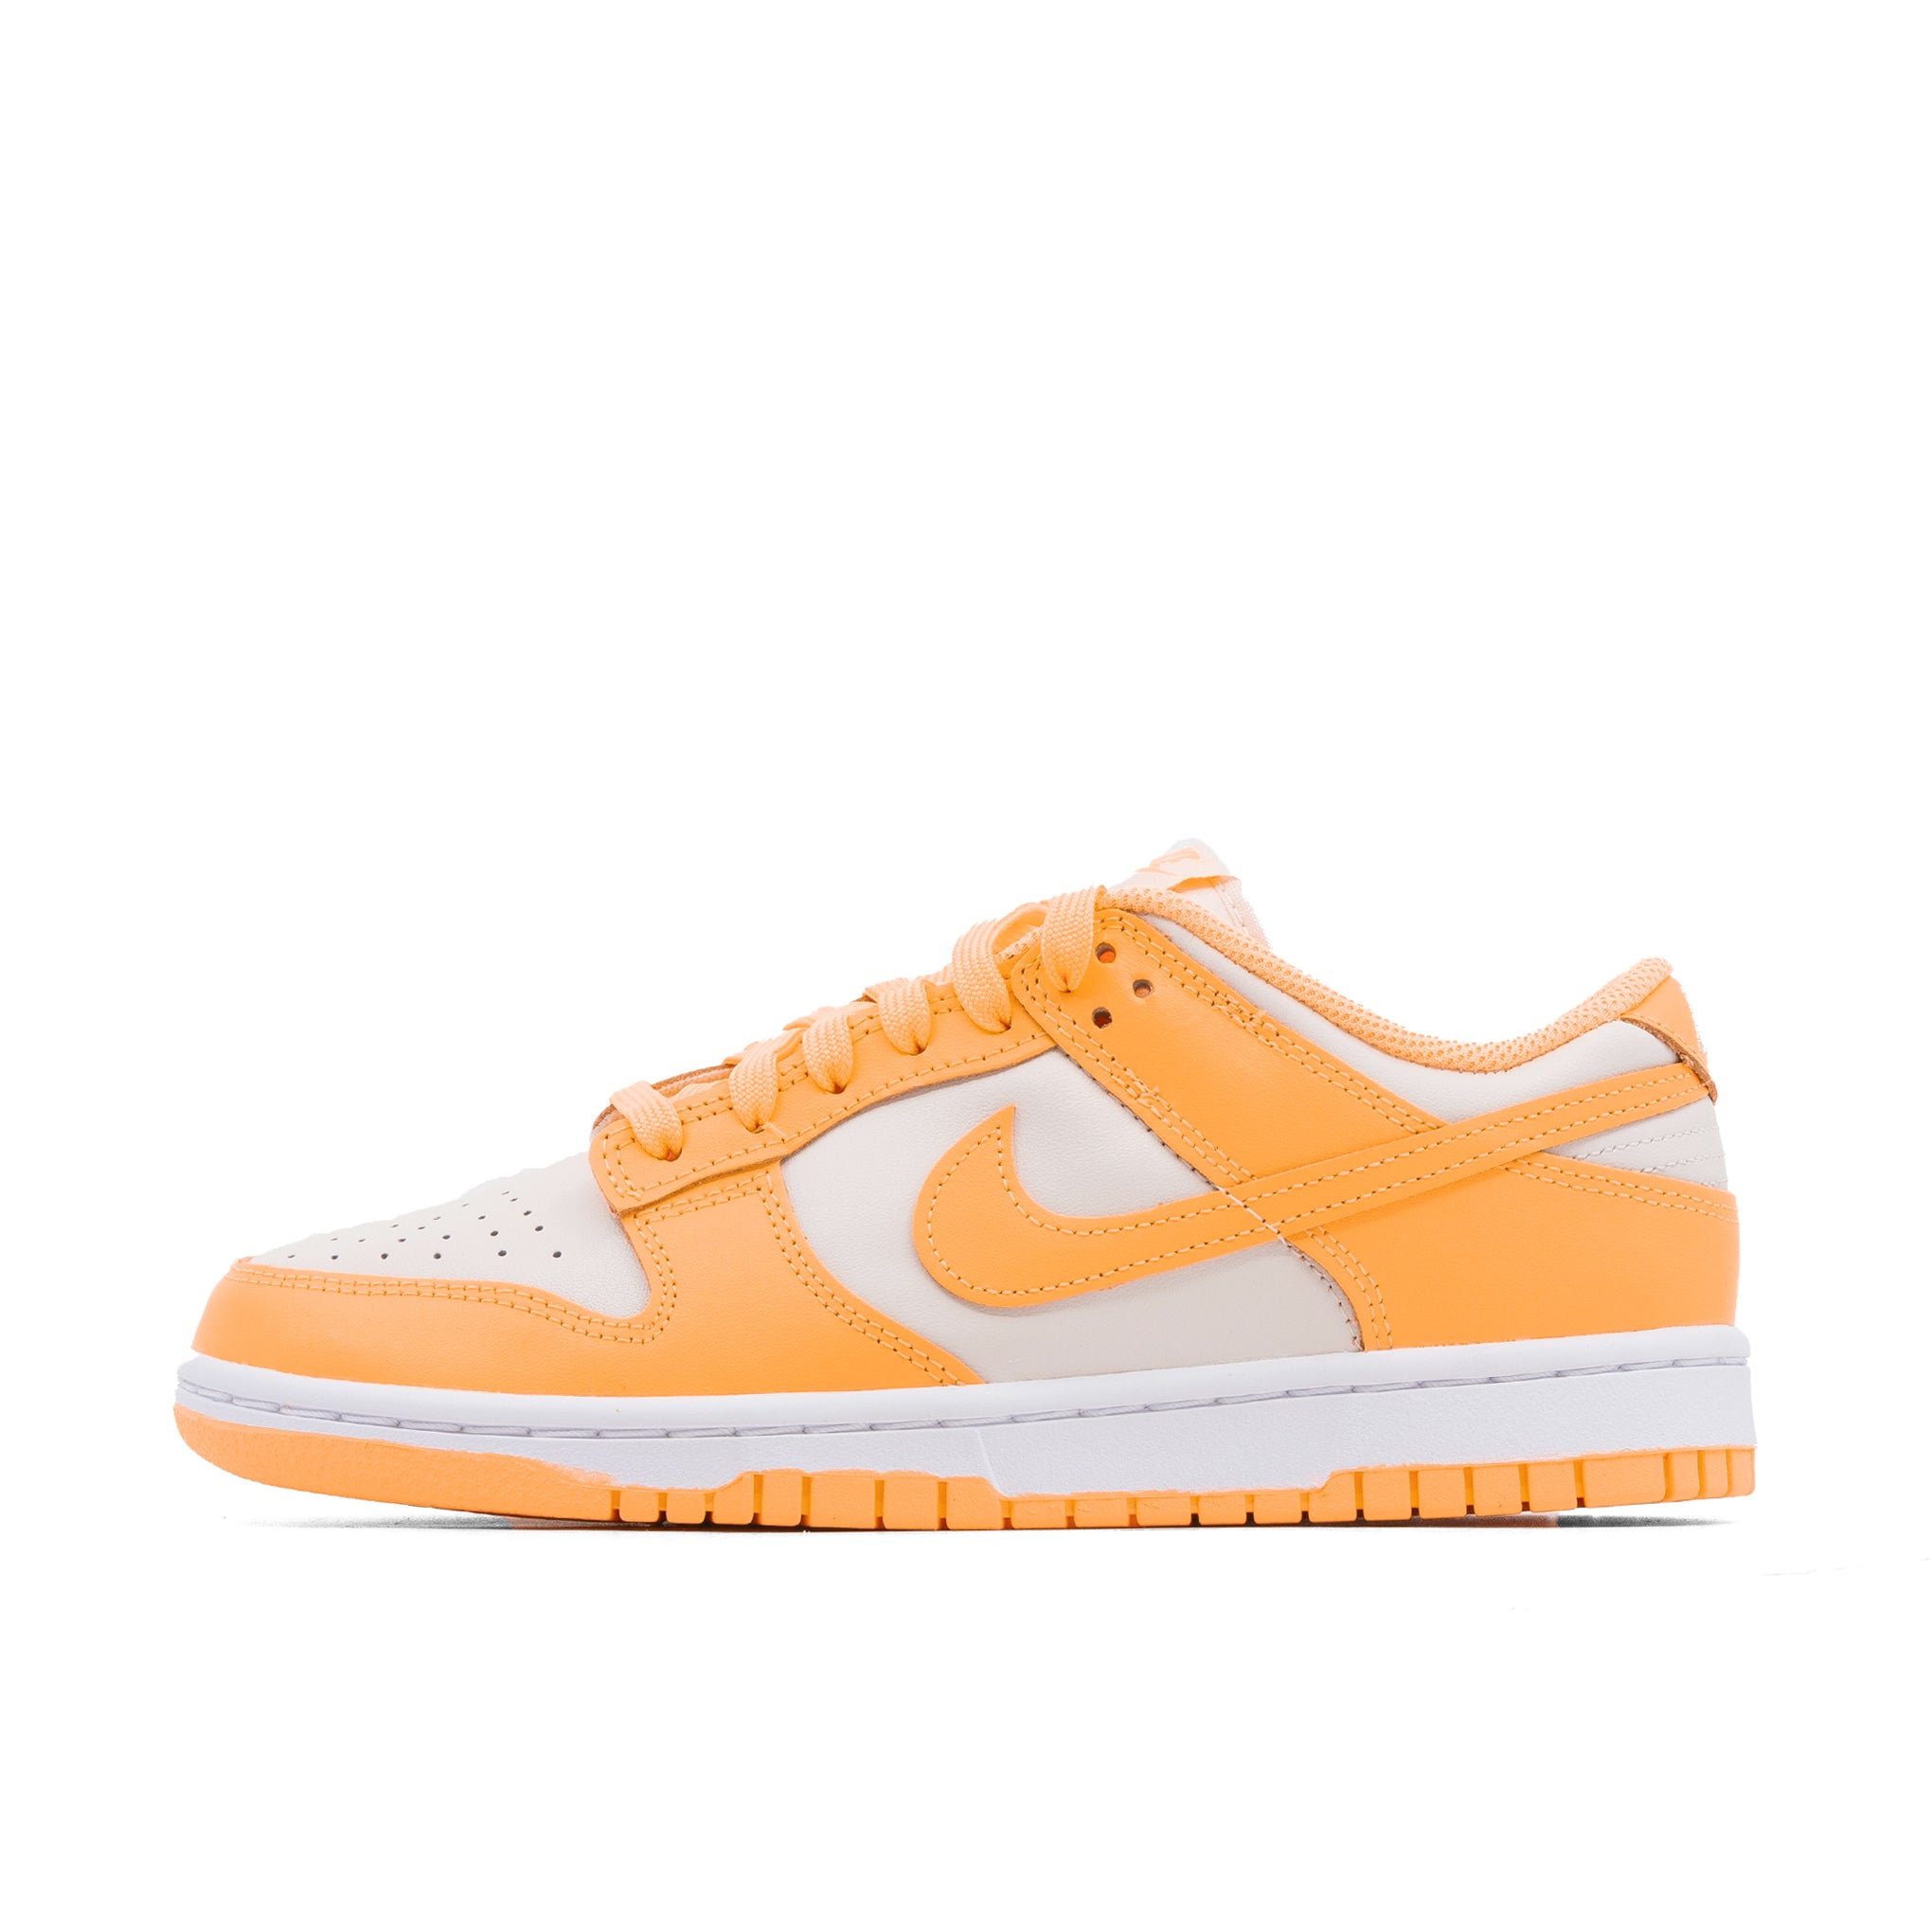 NIKE DUNK LOW MUJER MELOCOTÓN CREMA